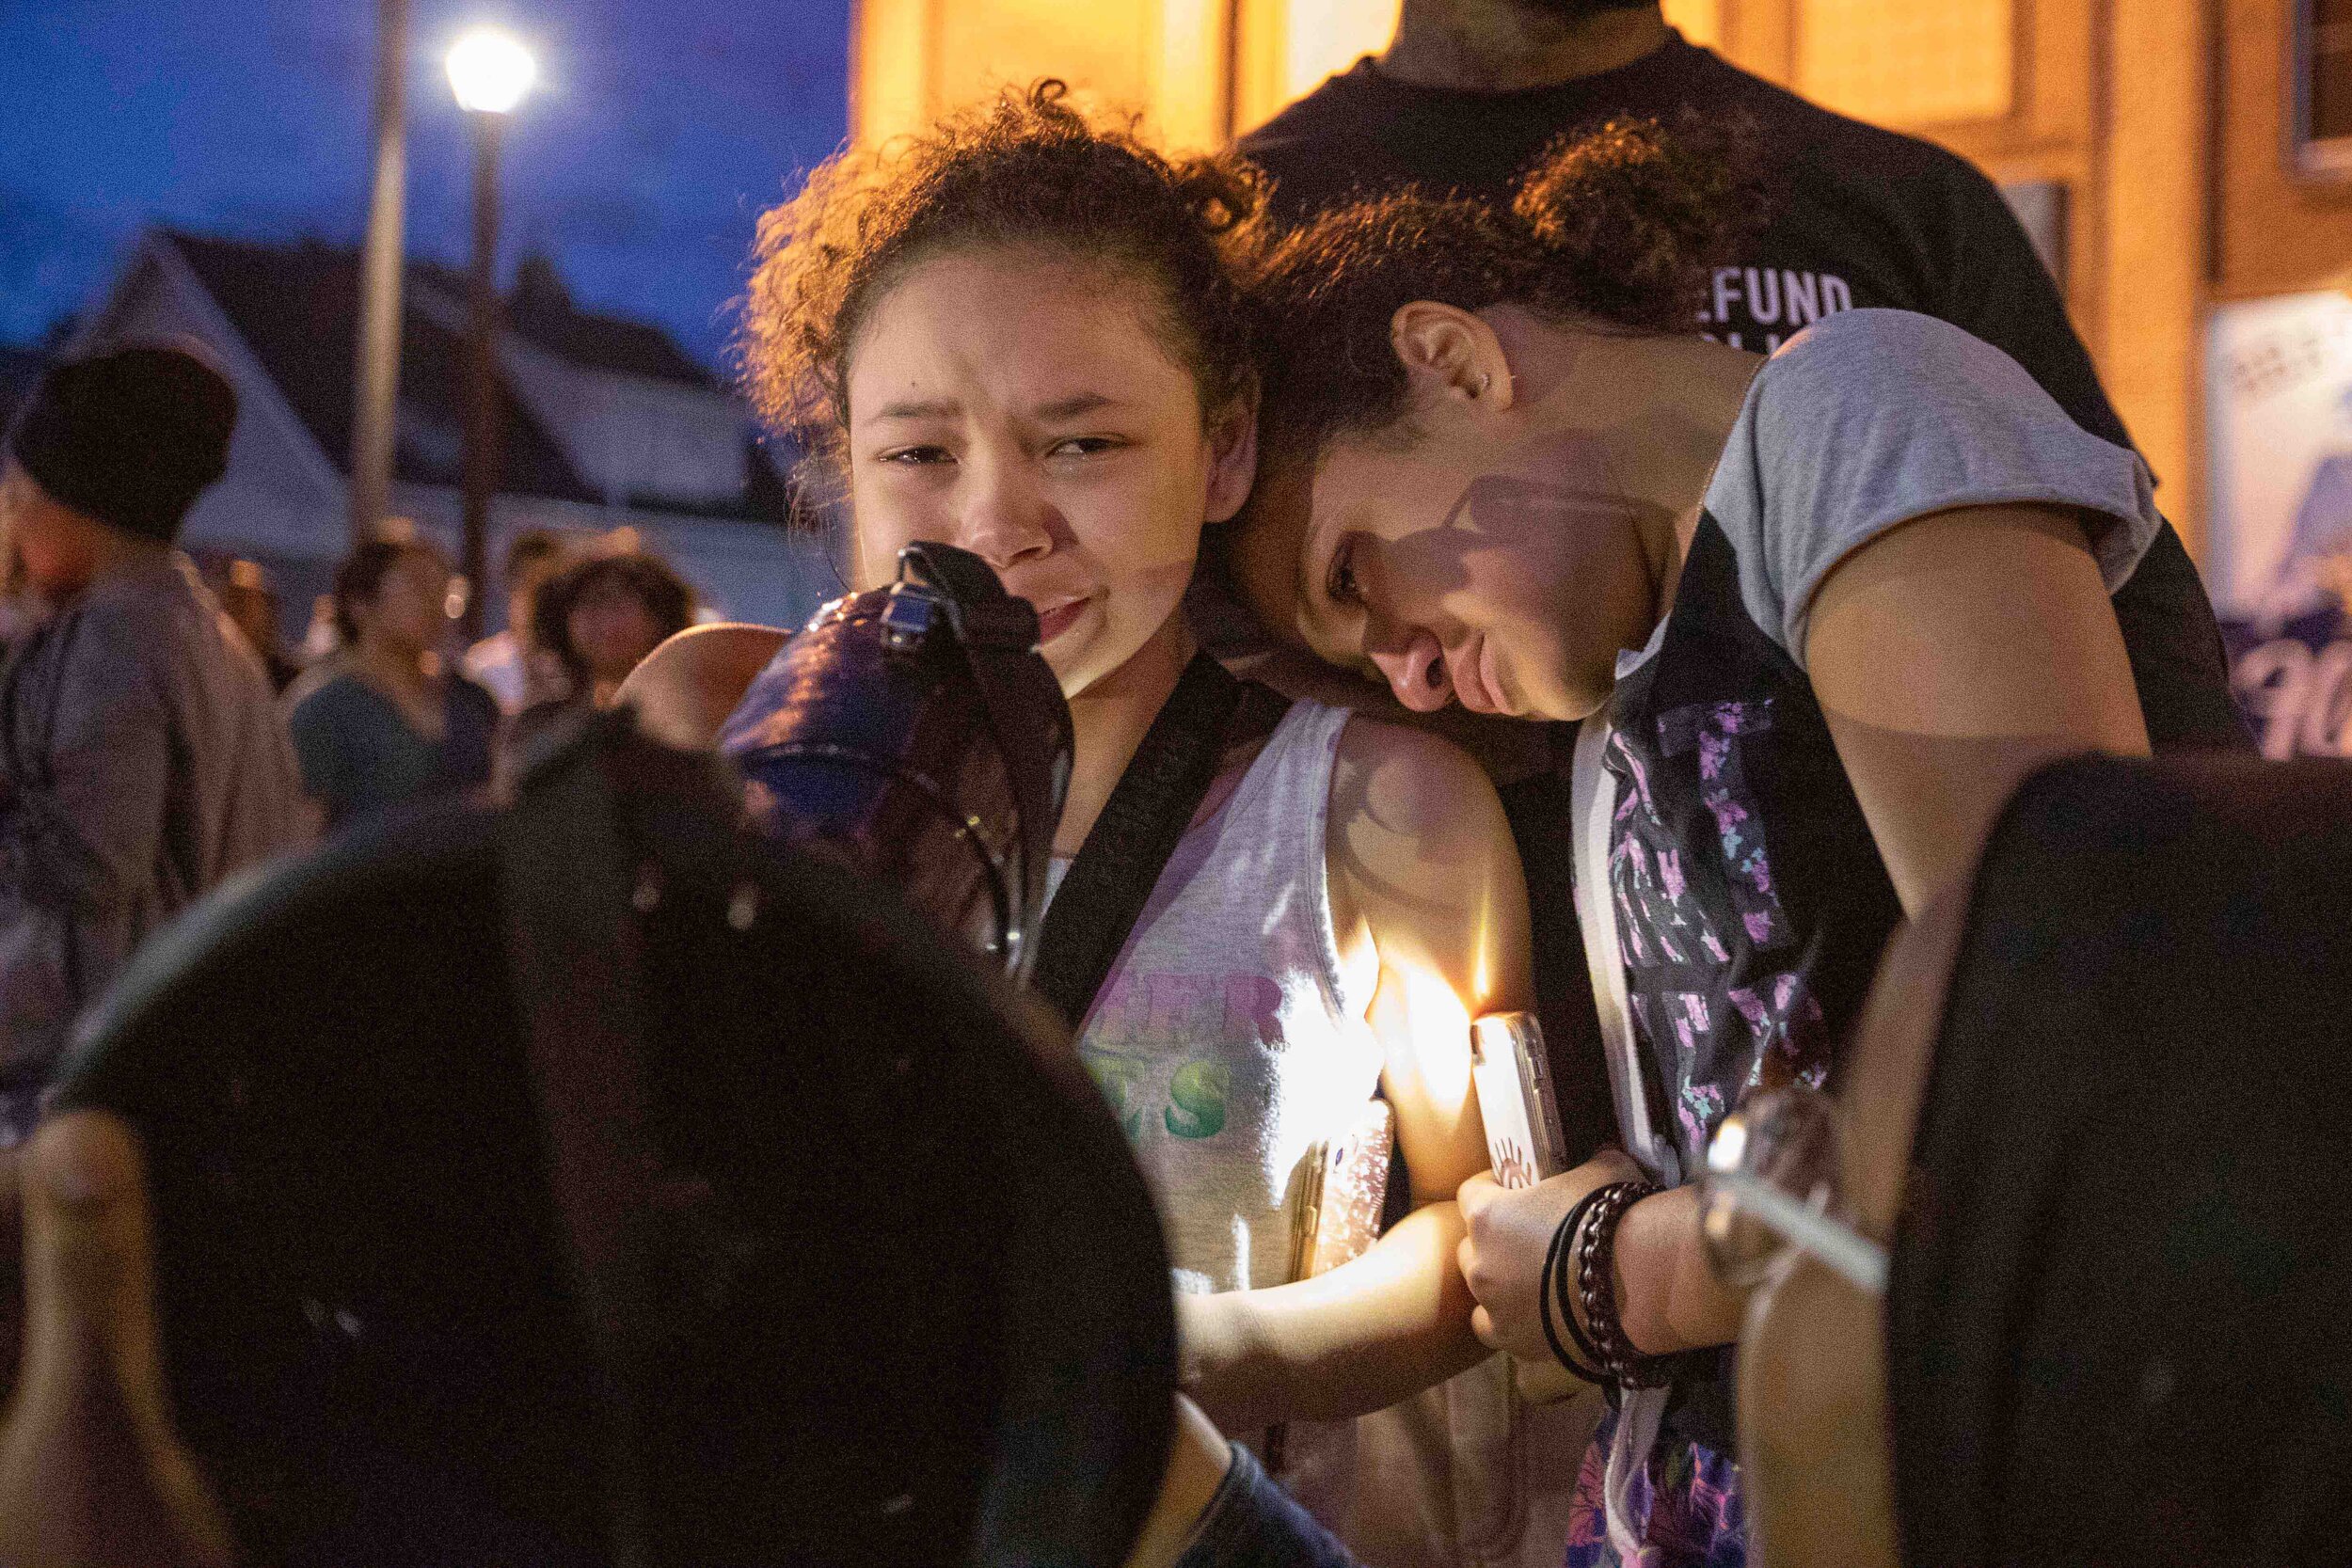  "I'm sorry I was born this color," a little girl says as she tears up on the megaphone while talking to the crowd at the site of George Floyd's memorial in Minneapolis, Minnesota on Jun 14, 2020. 